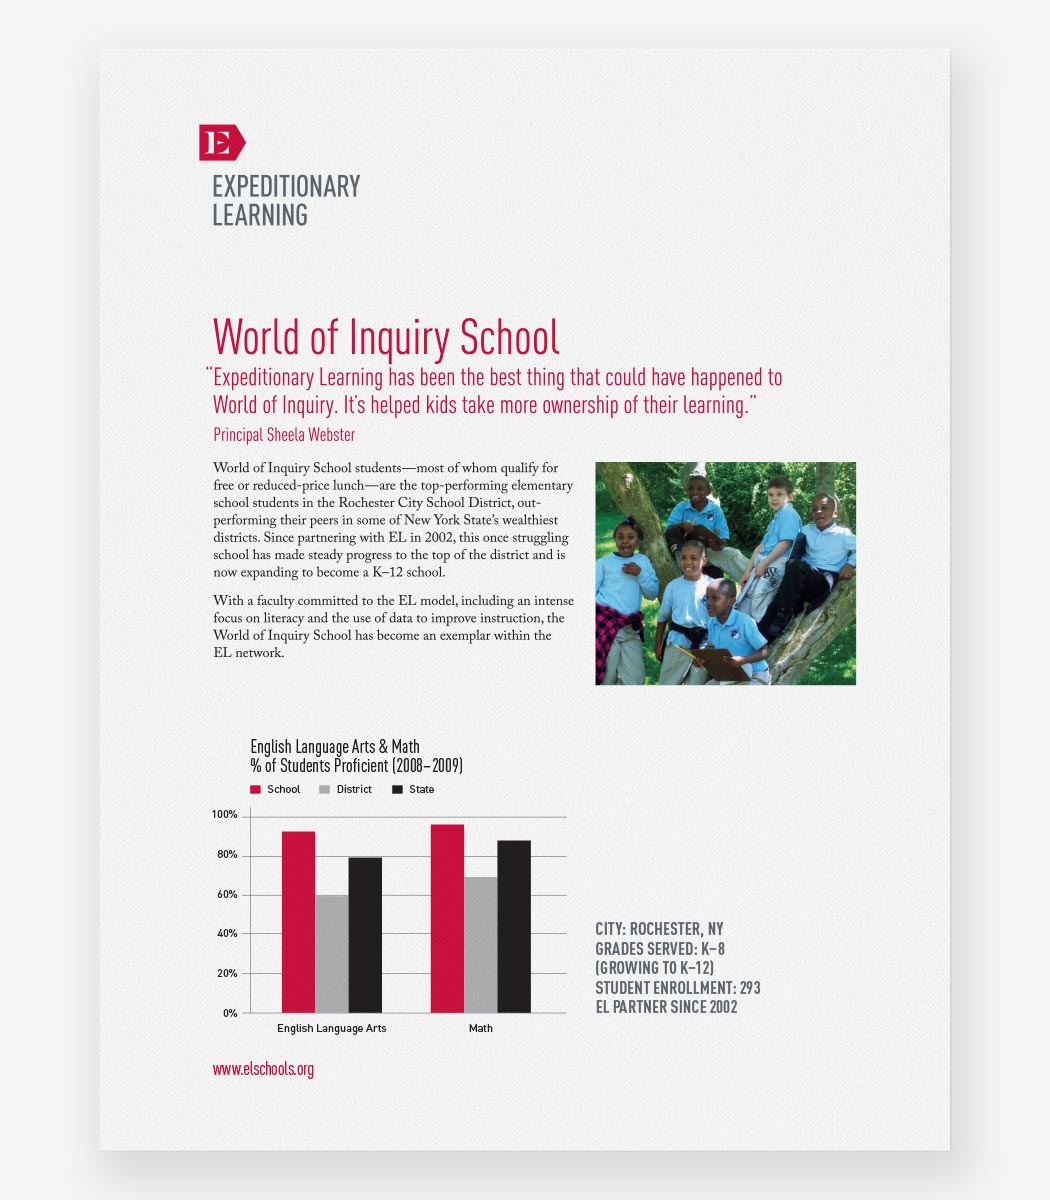 An Expeditionary Learning brochure with the title "World of inquiry school" with with images of students and a data chart.